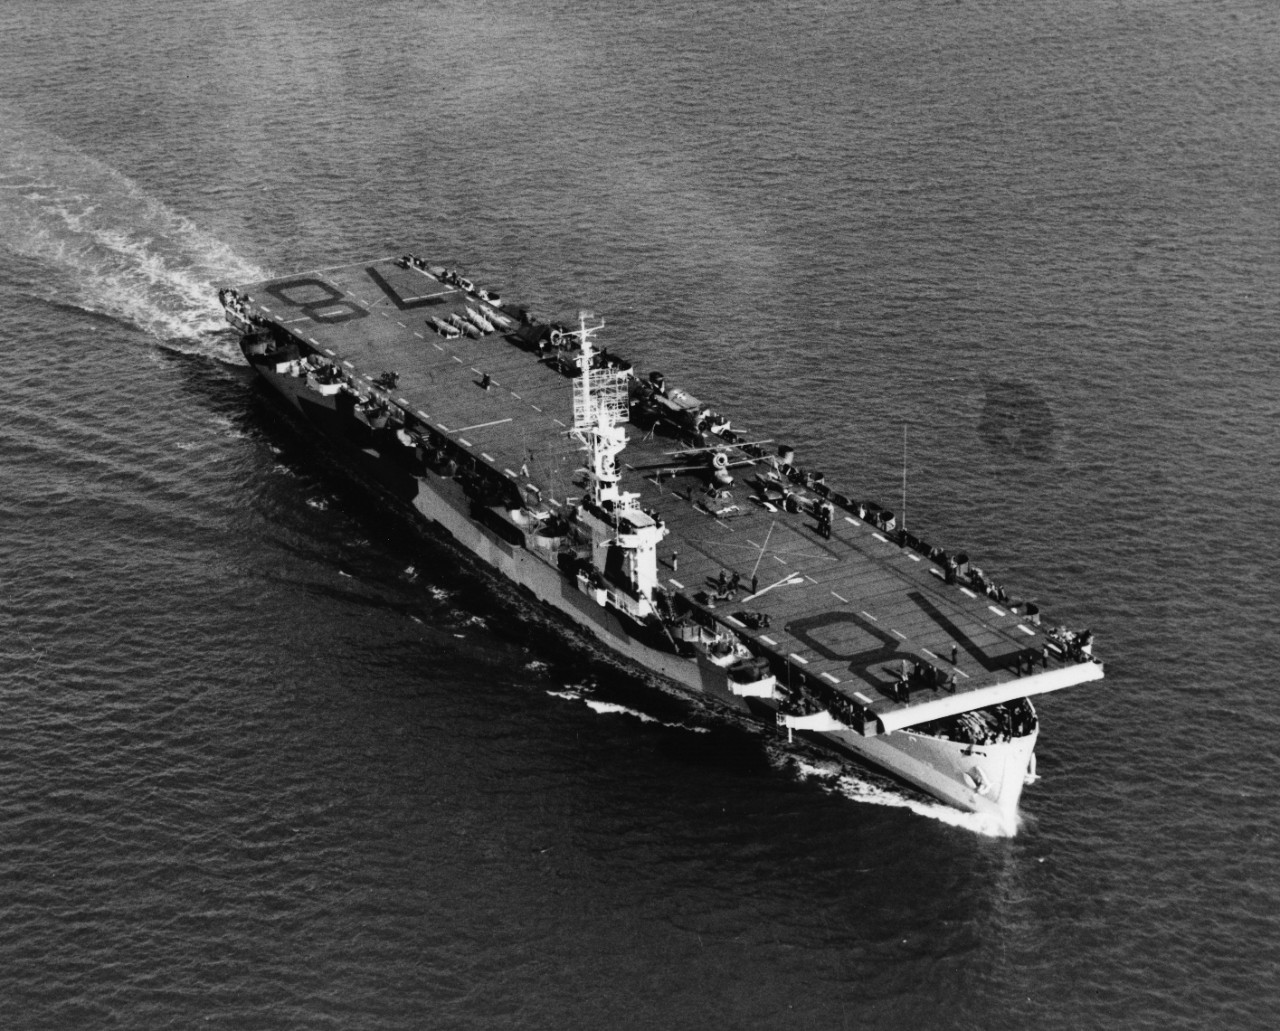 Starboard bow aerial view of Casablanca-class escort carrier USS Savo Island (CVE-78) underway. Note disassembled aircraft on the flight deck, and camouflage paint scheme.